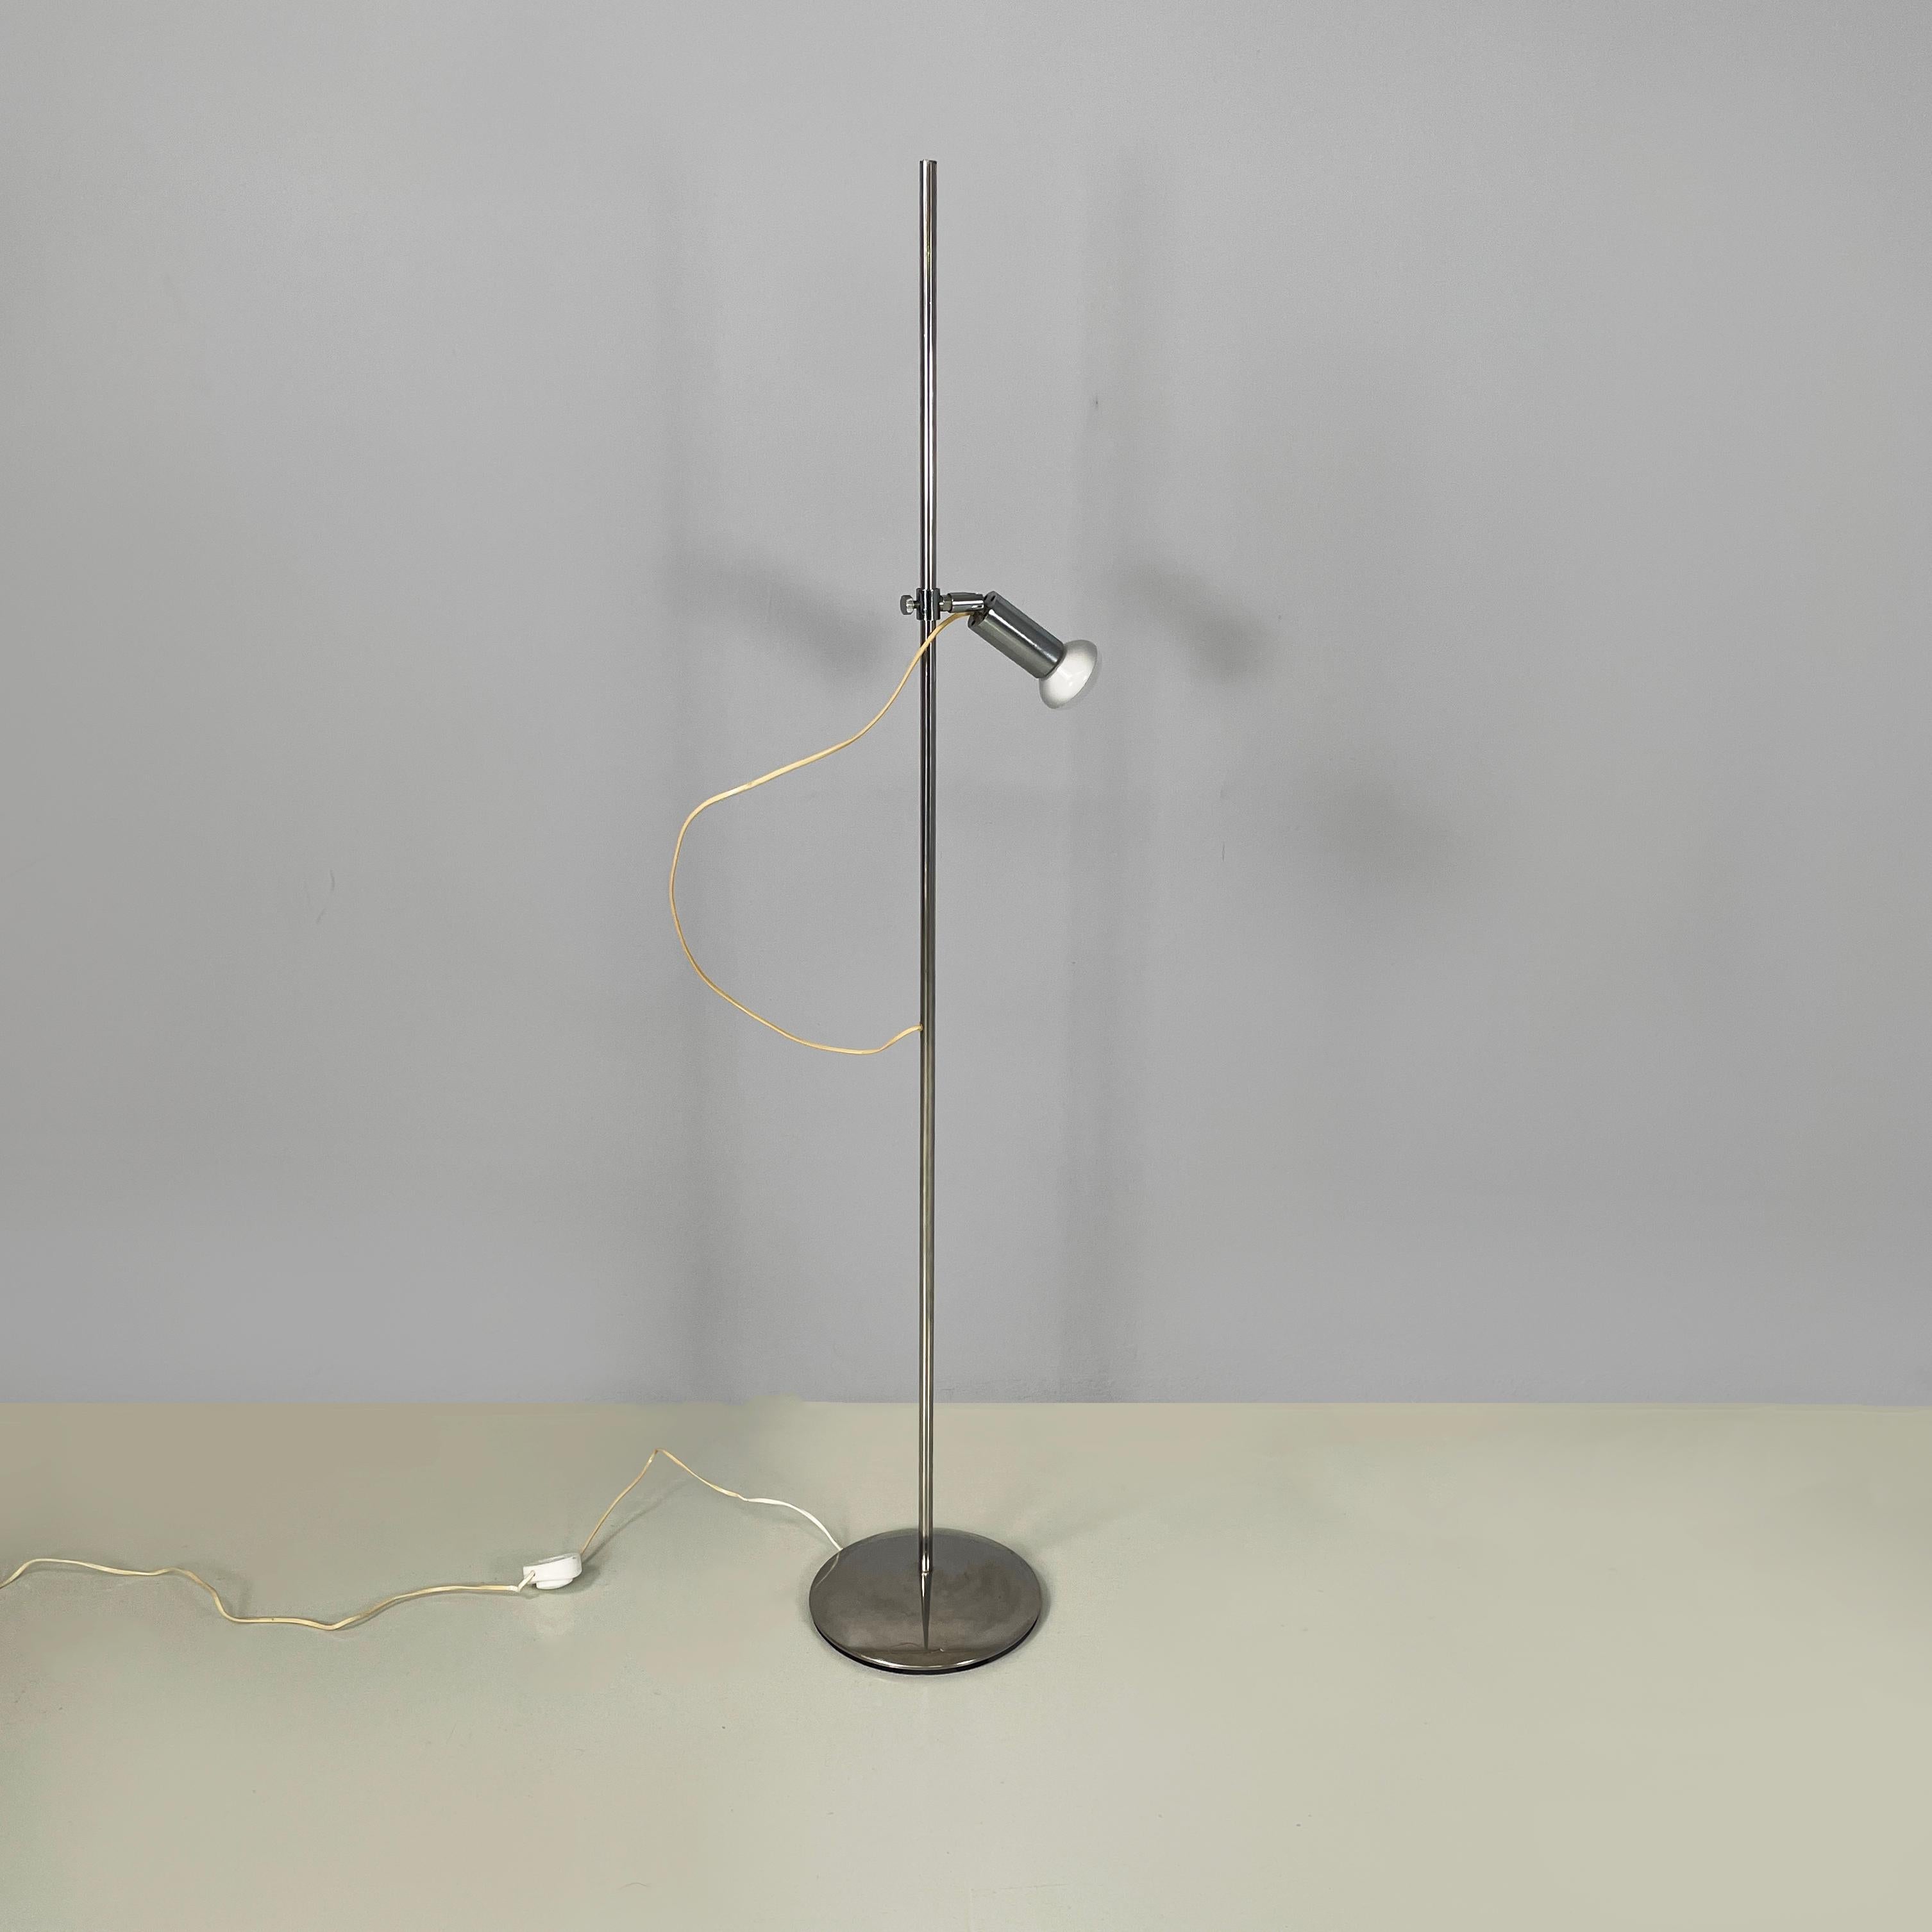 Italian space age Chromed metal Adjustable floor lamp by Reggiani, 1970s
Adjustable floor lamp entirely in chromed metal. The cylindrical diffuser can be adjusted in height and inclination. The structure is made of a chromed metal rod. The round